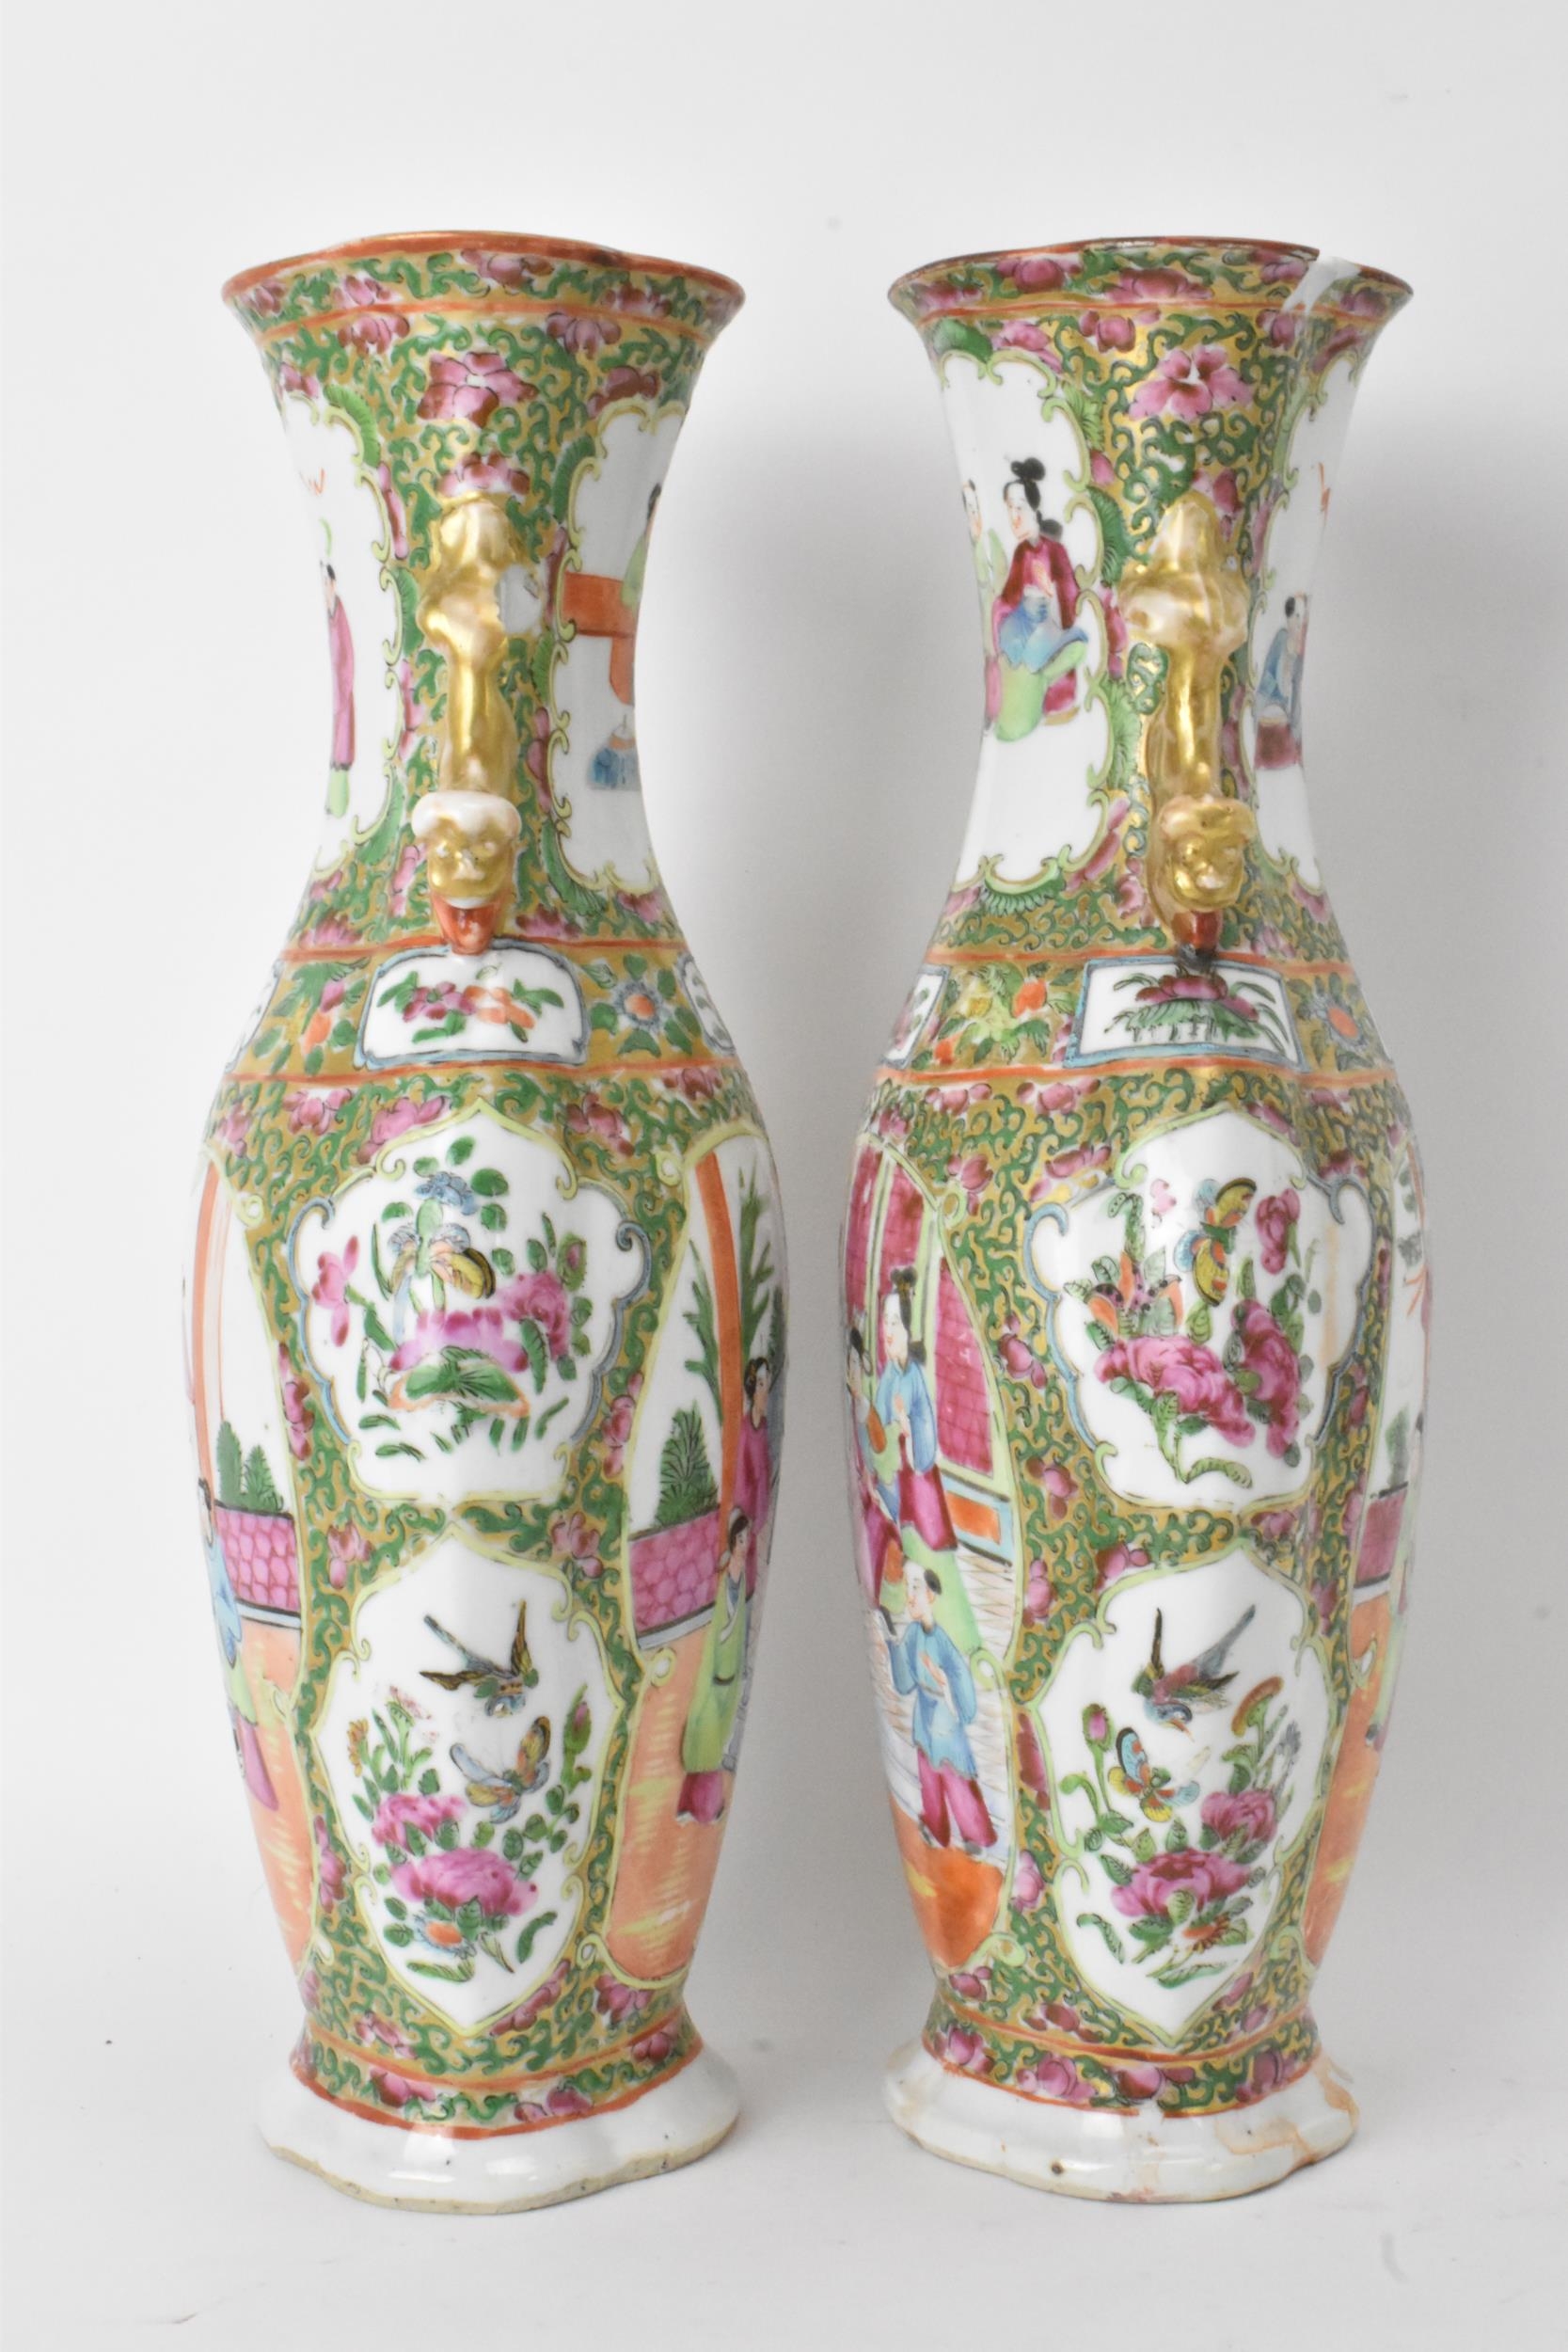 A pair of Chinese export Canton Famille Rose vases, Qing Dynasty, late 19th century, in polychrome - Image 2 of 6